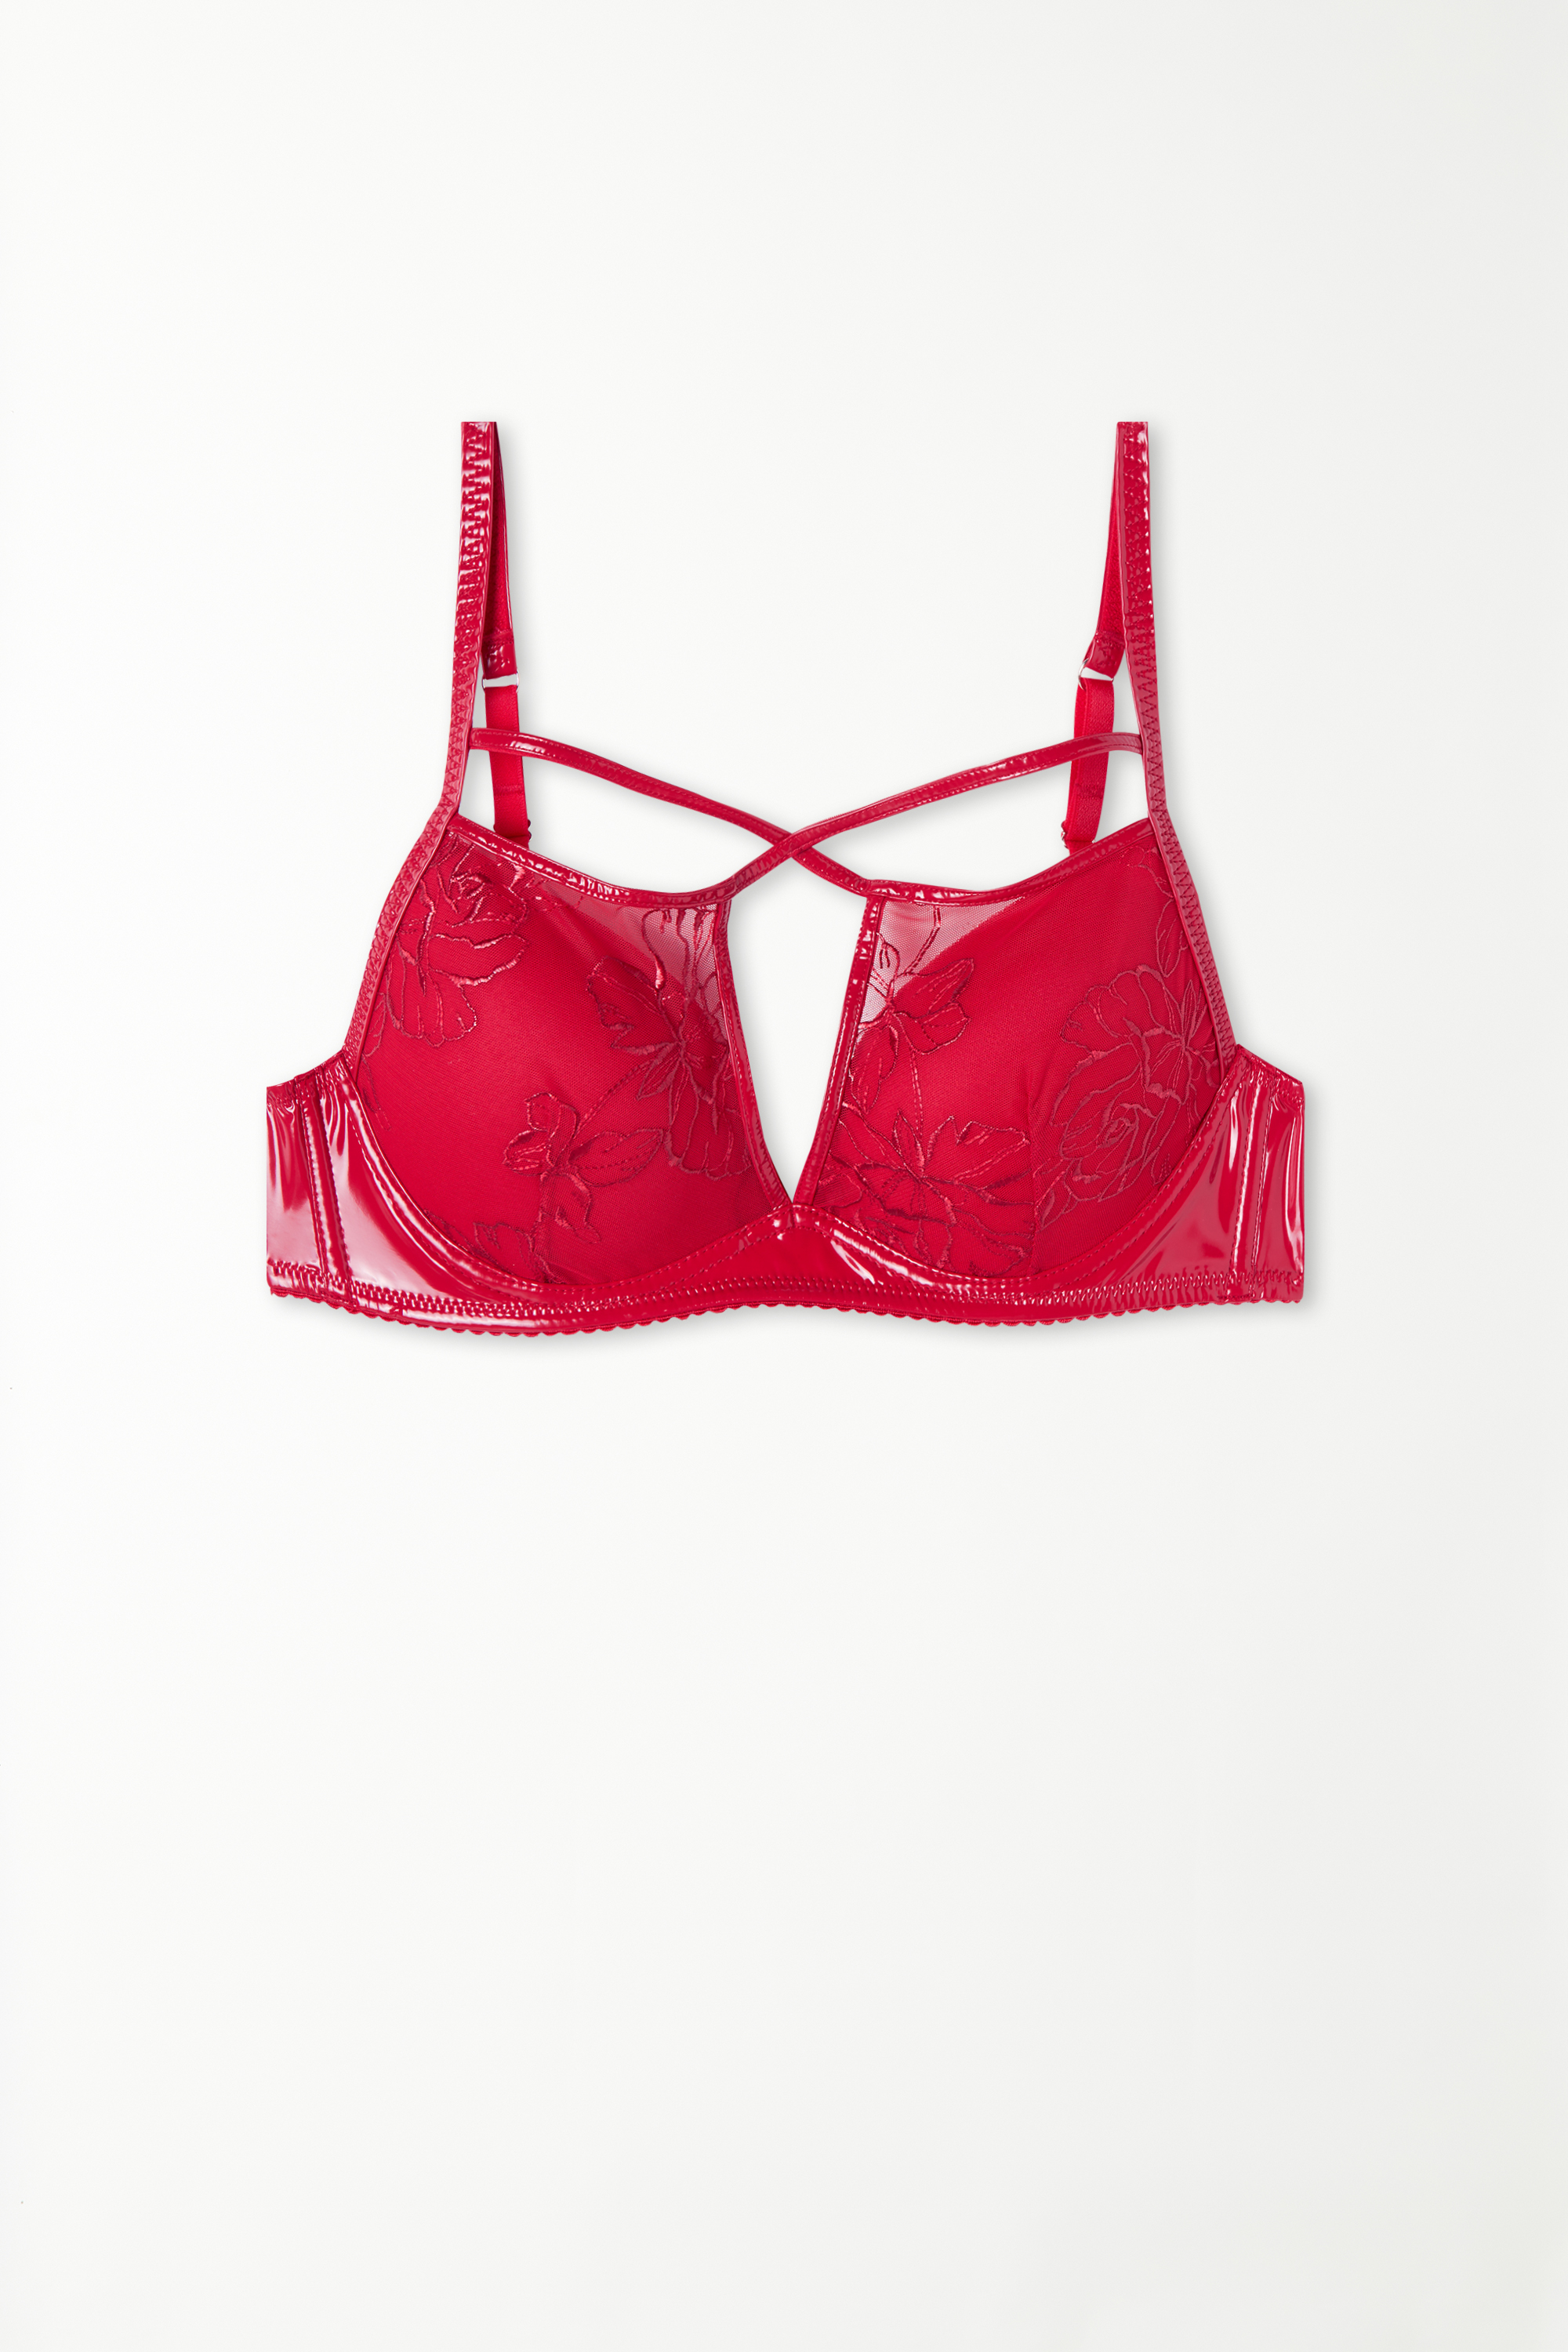 Soutien-gorge Push-up Moscow Red Lace Vinyl